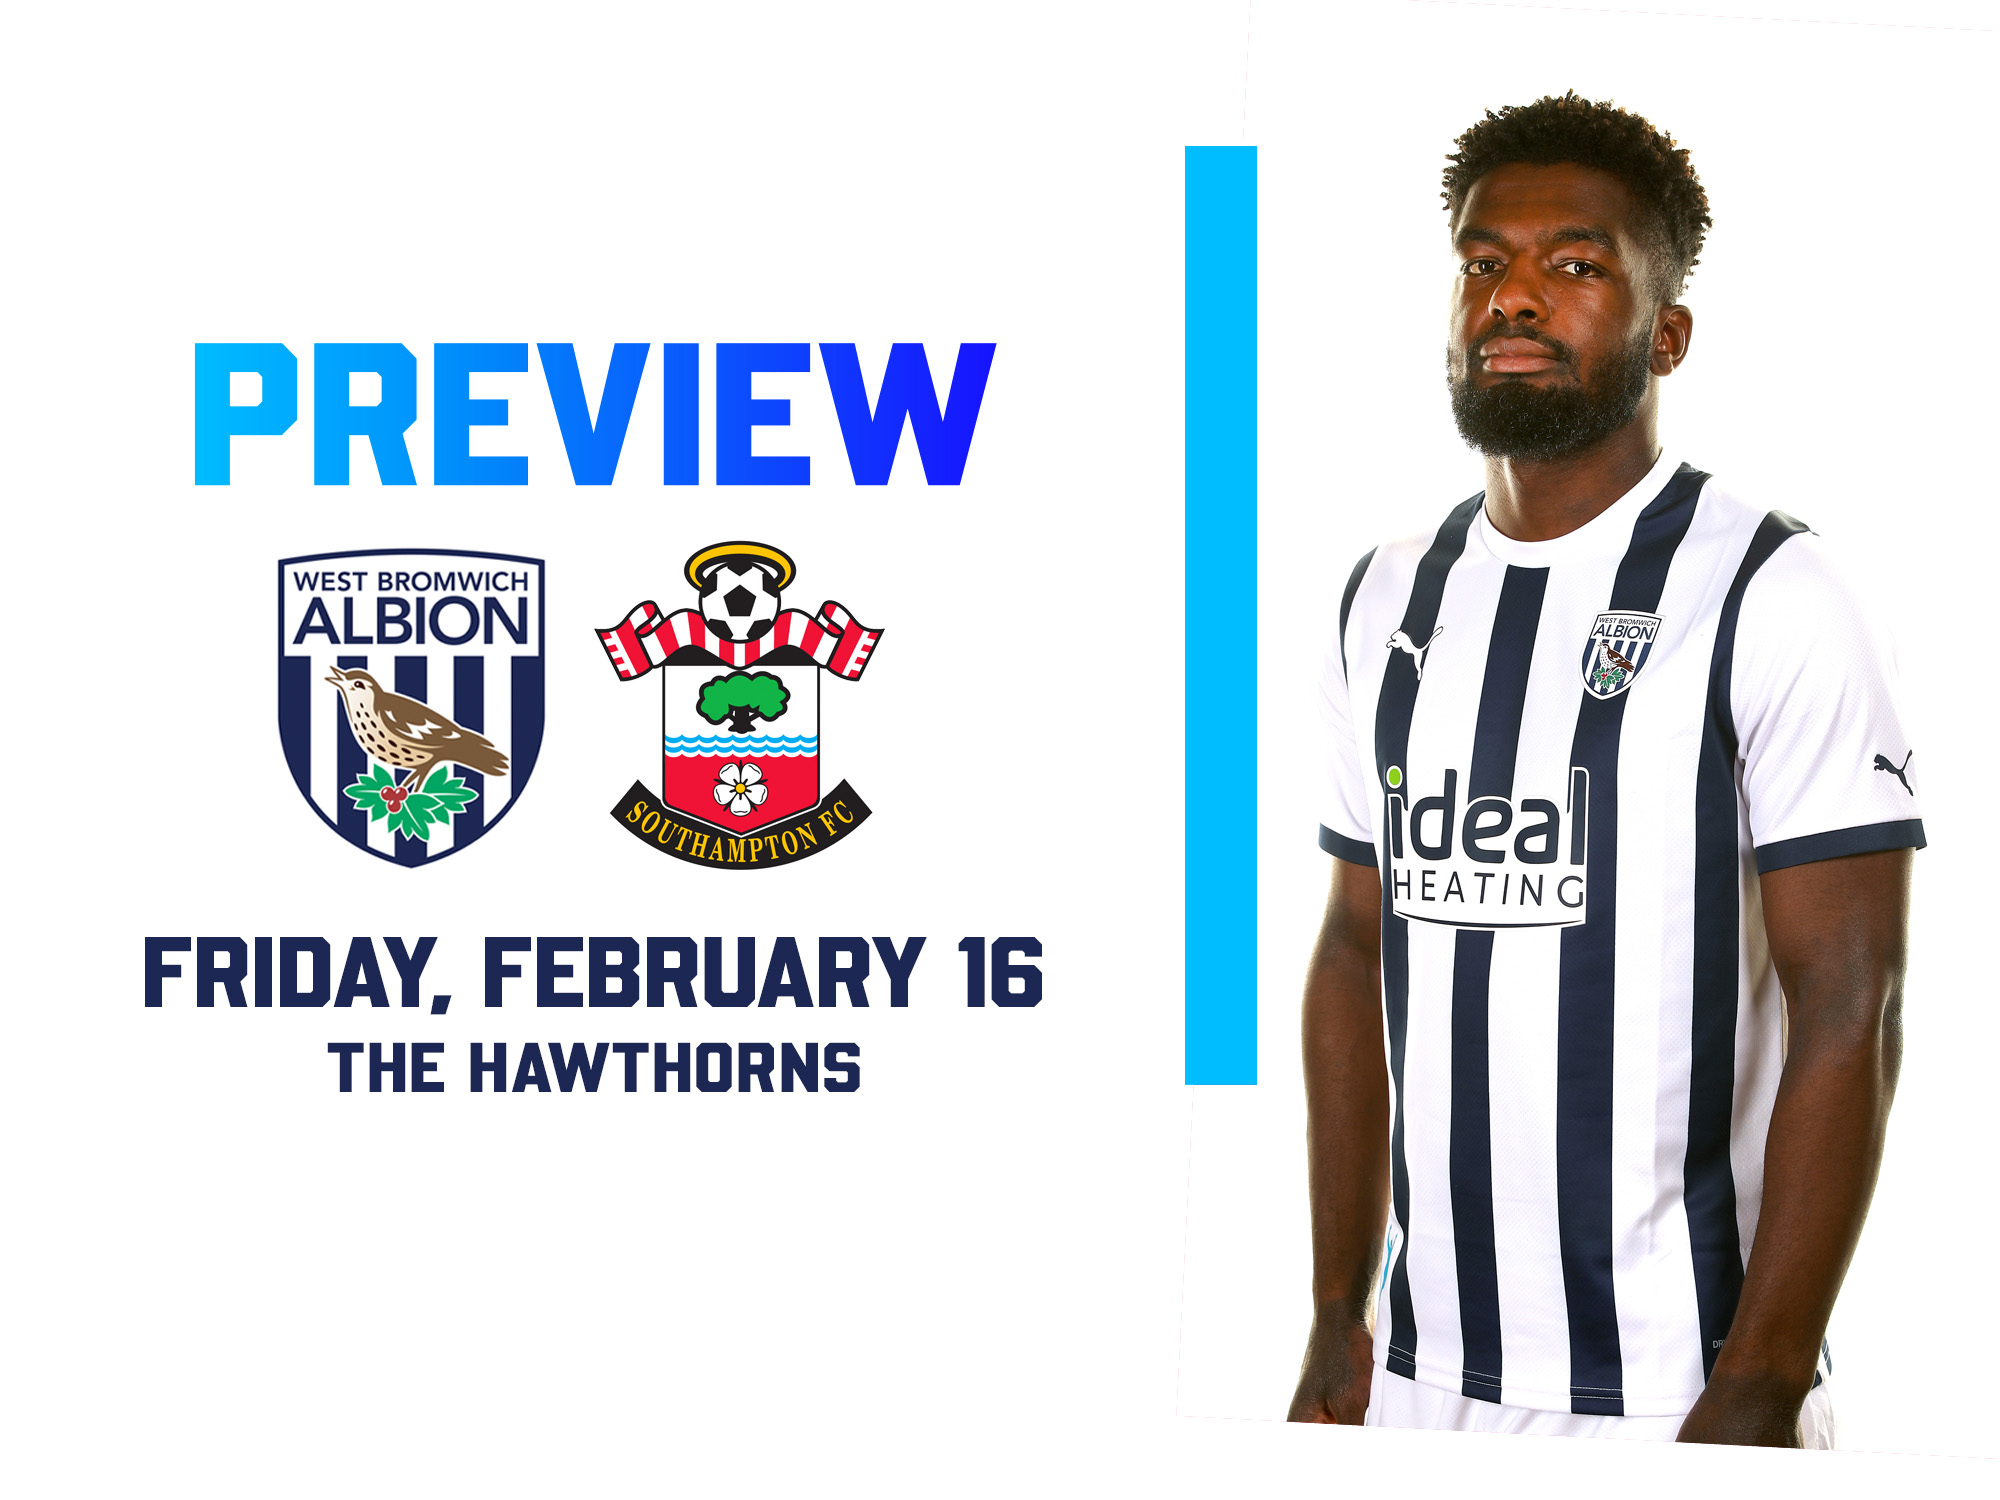 WBA and Southampton badges on the home match preview next to an image of Cedric Kipre staring at the camera wearing a home shirt